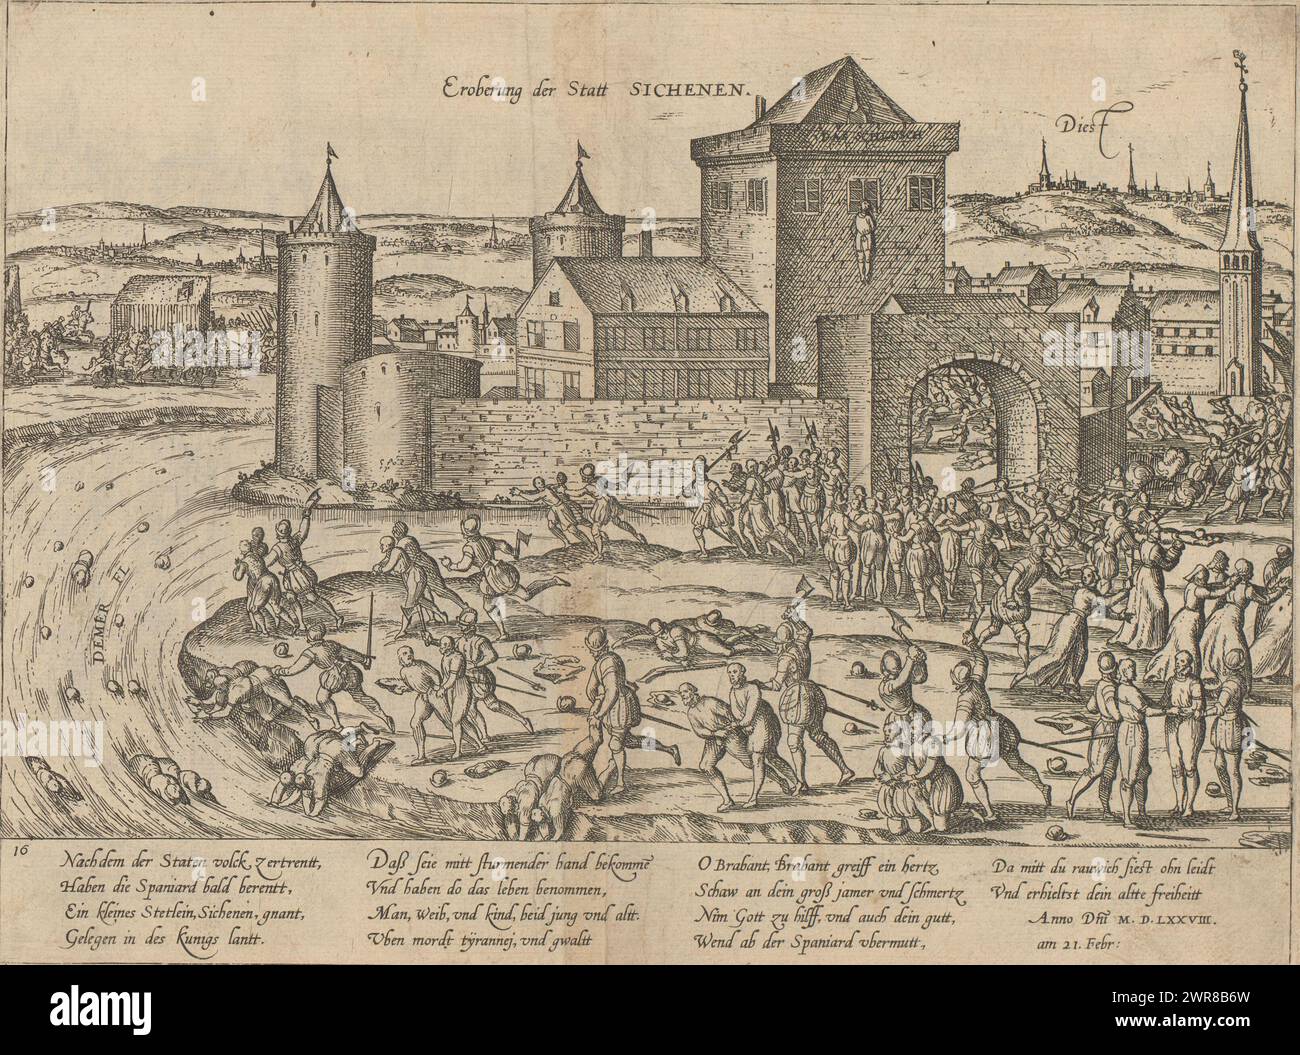 Punishment of Zichem, 1578, Eroberung der Statt Sichenen (title on object), Series 8: Dutch Events, 1577-1583 (series title), Conquest and punishment of the town of Zichem by the troops of the Duke of Parma, February 21, 1578. Outside the city gate, a large number of civilians are killed and their bodies thrown into the river. In the distance the city of Diest. With caption of 14 lines in German. Numbered: 16. The print is part of an album., print maker: Frans Hogenberg, Cologne, 1578 - 1580, paper, etching, height 212 mm × width 284 mm, print Stock Photo